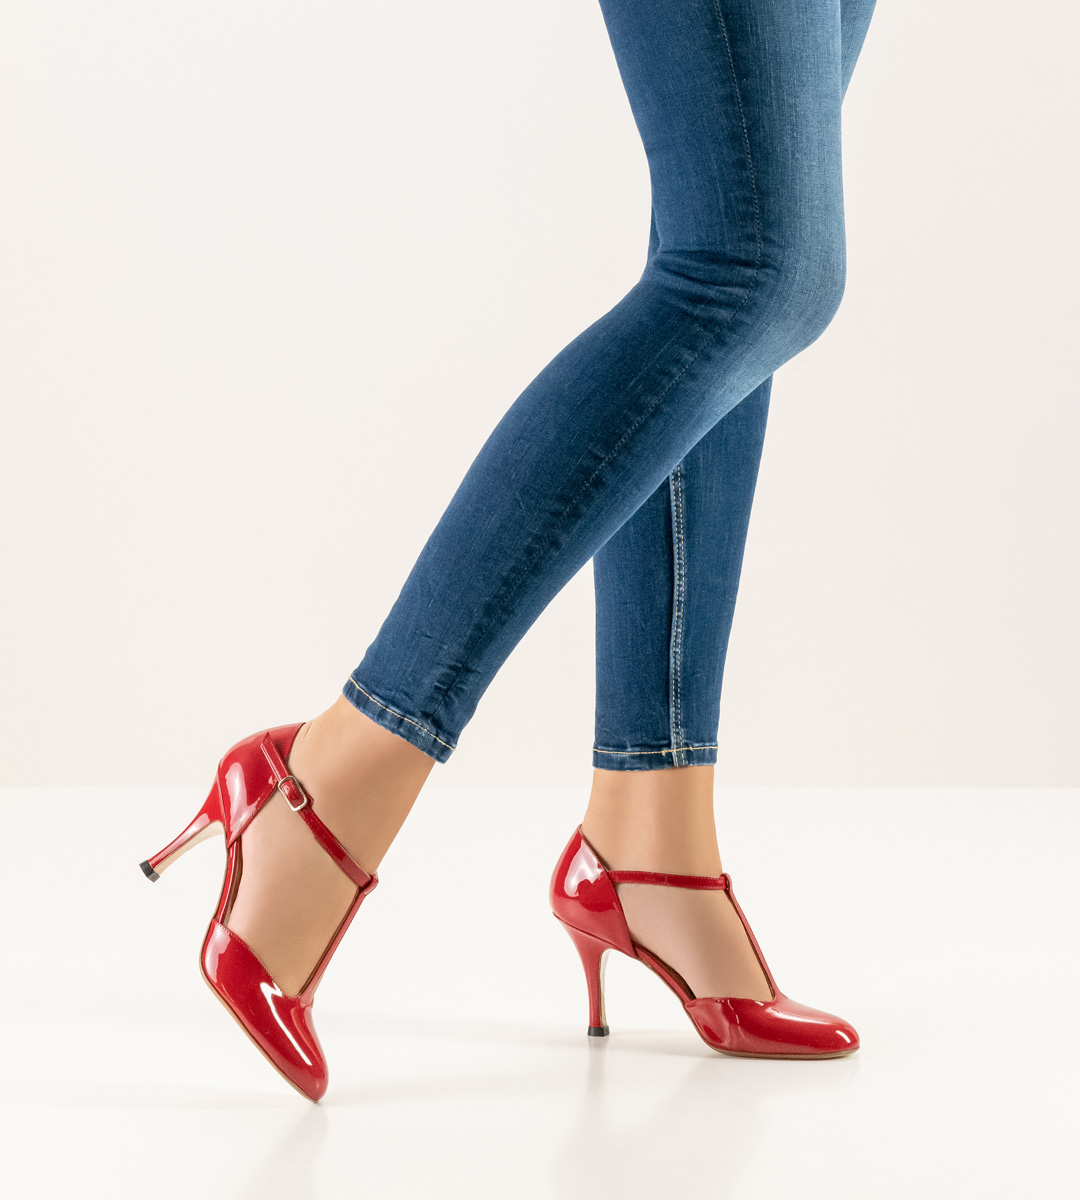 T-bar ladies dance shoe by Nueva Epoca in red in combination with blue jeans